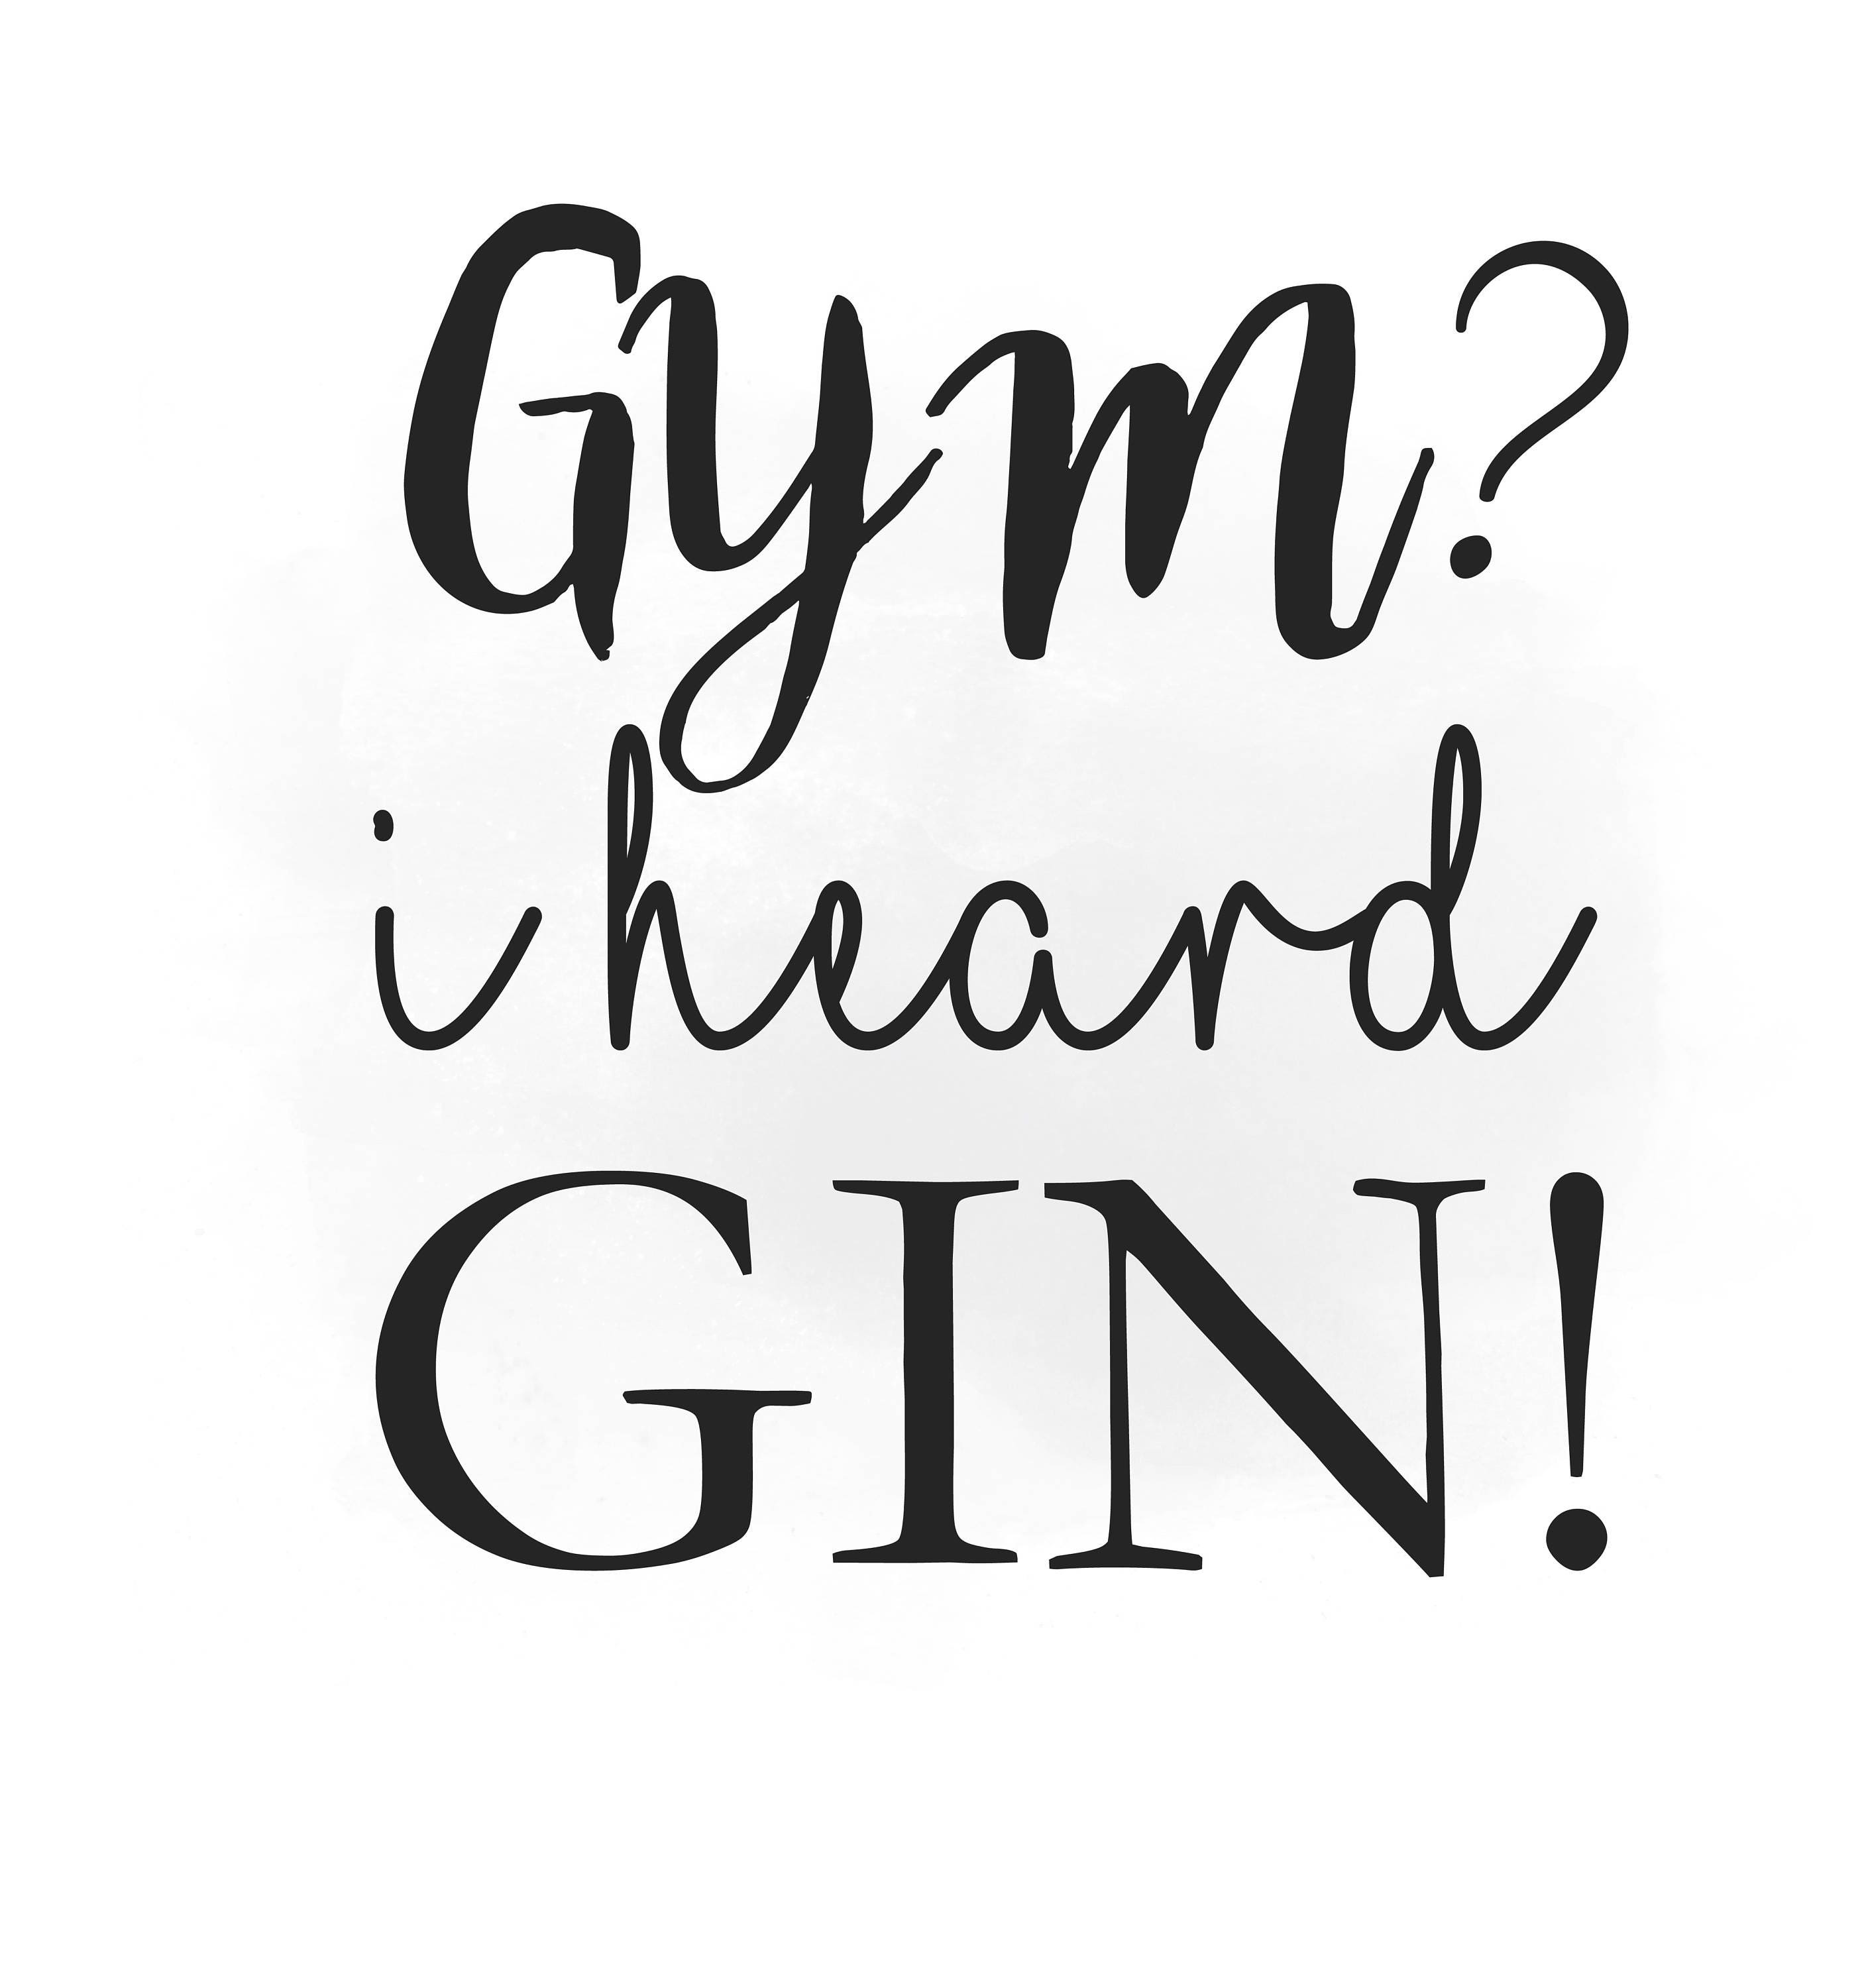 Download Gym i heard Gin SVG clipart alcohol Quote Art Gin tonic